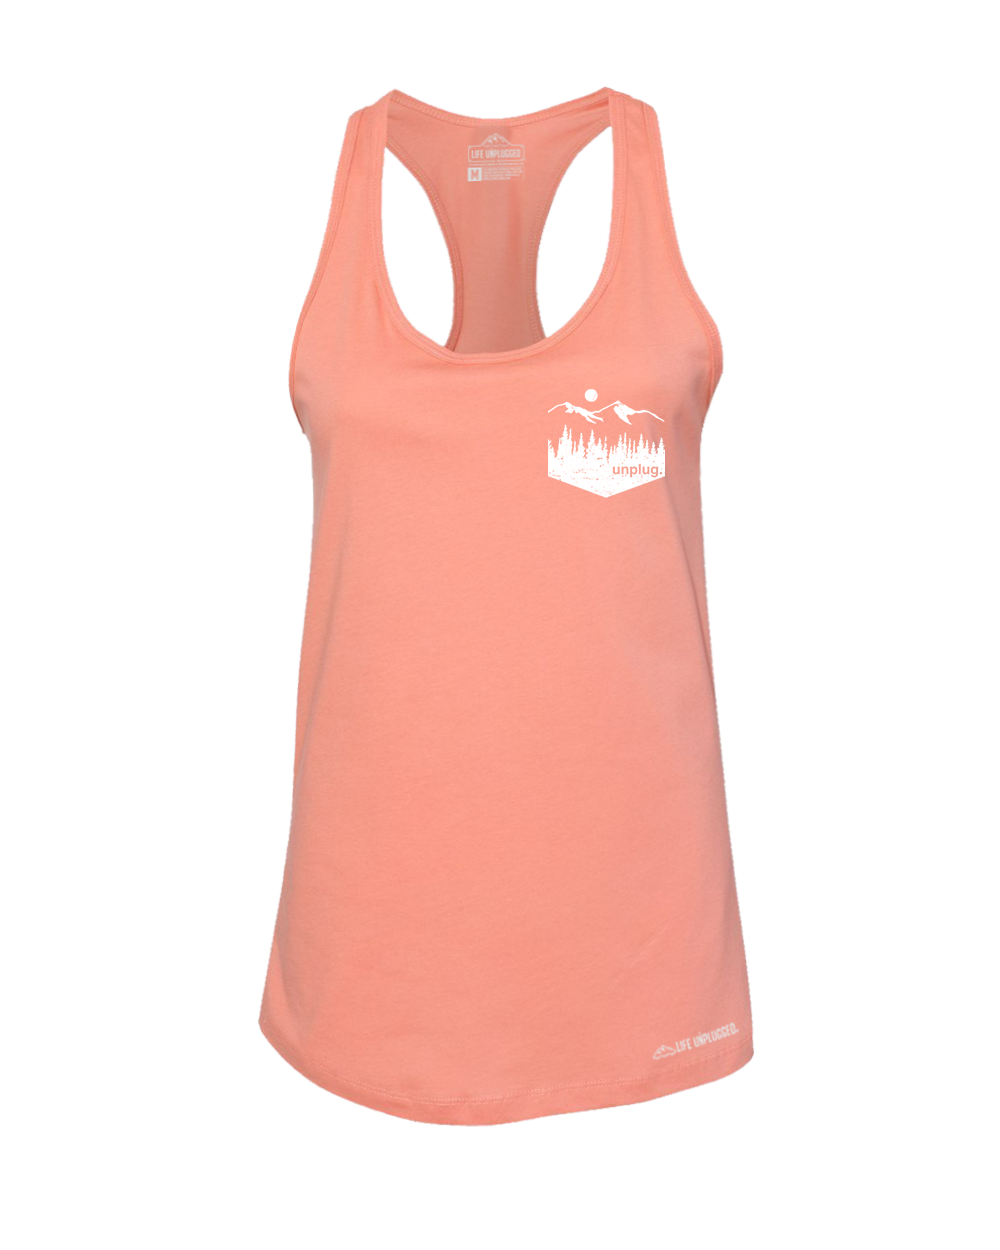 Unplug Mountain Left Chest Pocket Premium Women's Relaxed Fit Racerback Tank Top - Life Unplugged